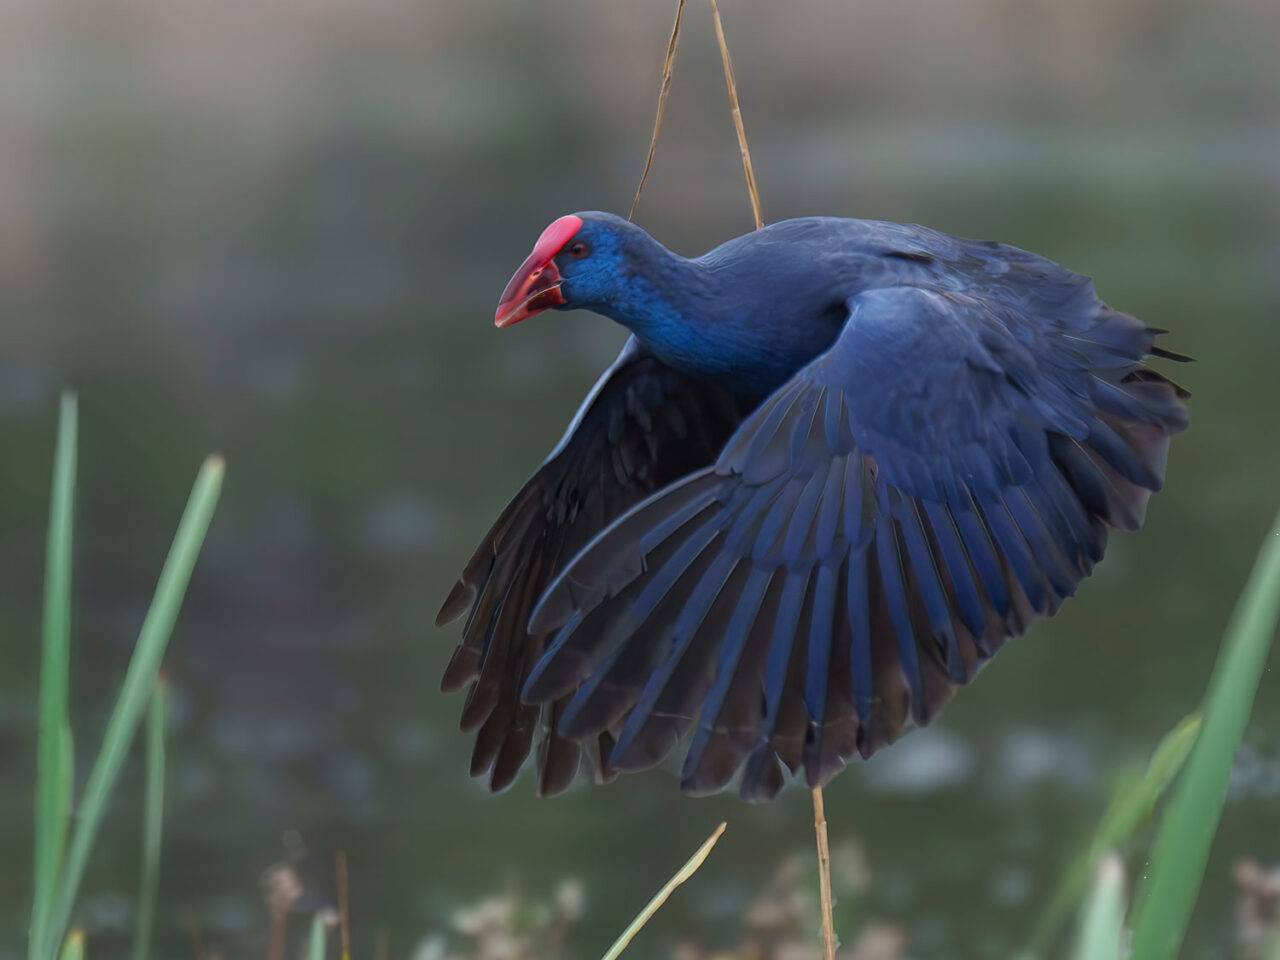 a purple-blue bird with a red forehead flies across a marsh